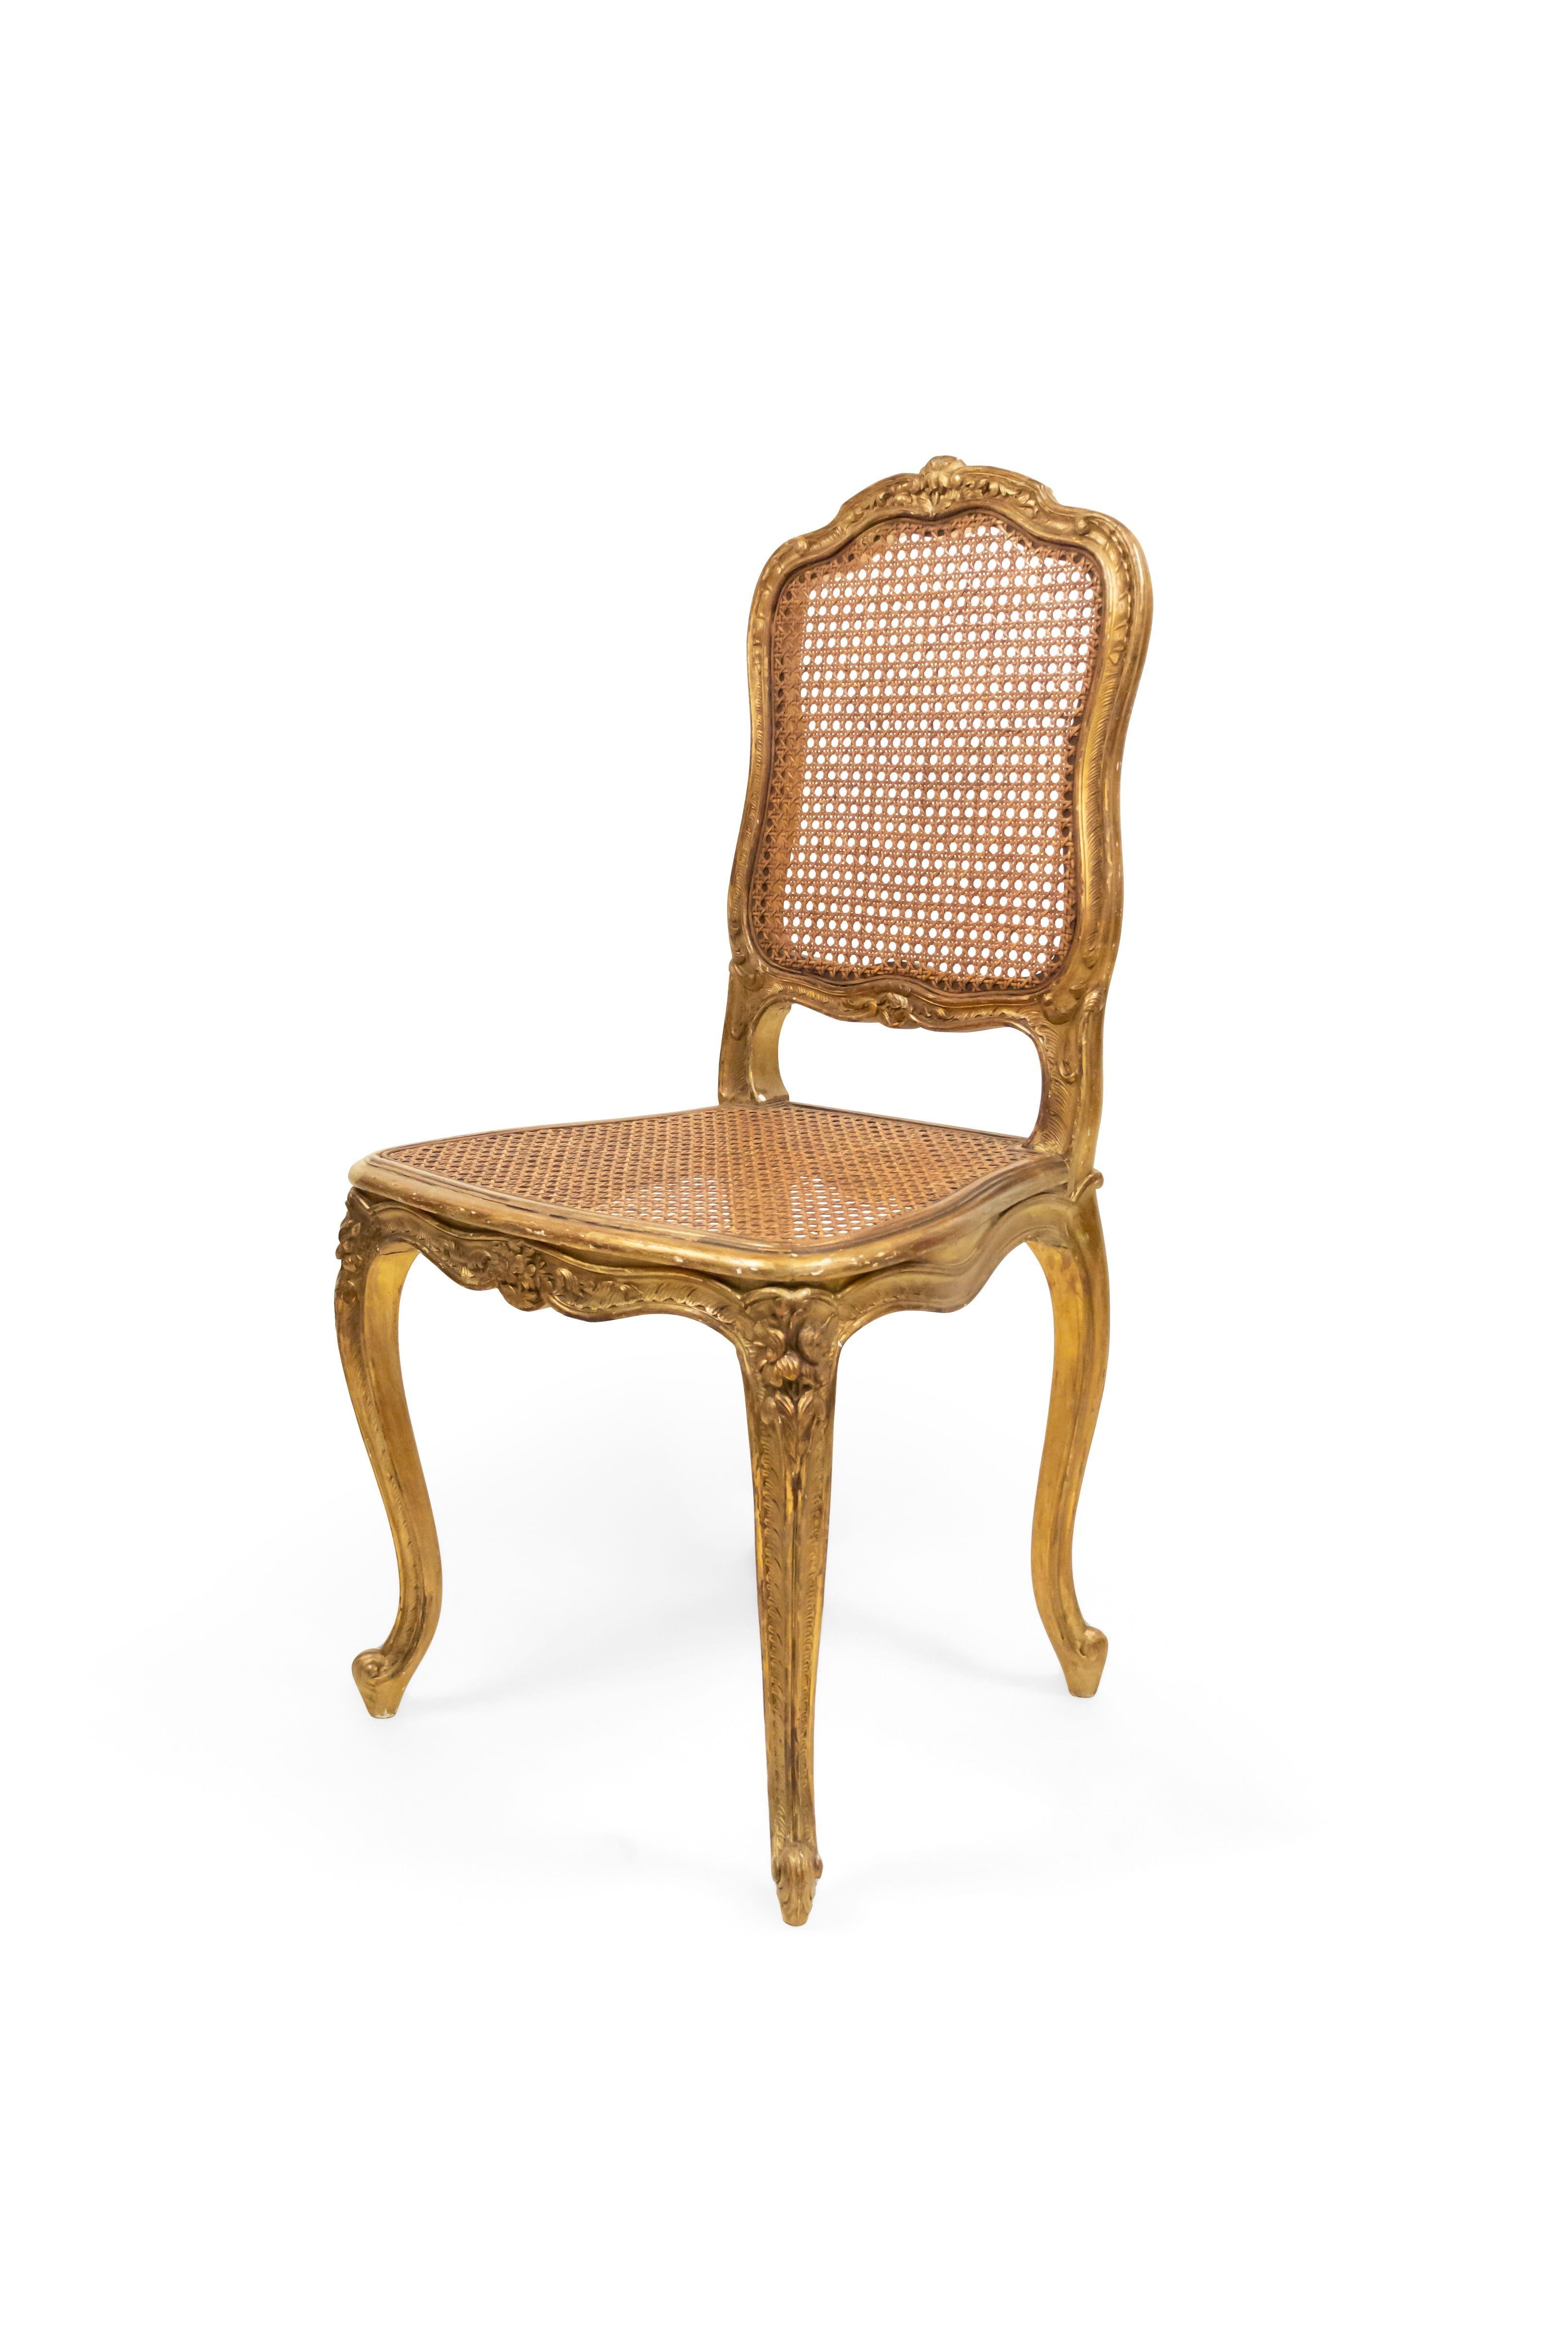 Set of 8 French Louis XV style (19th Century) gilt side chairs with cane seats.